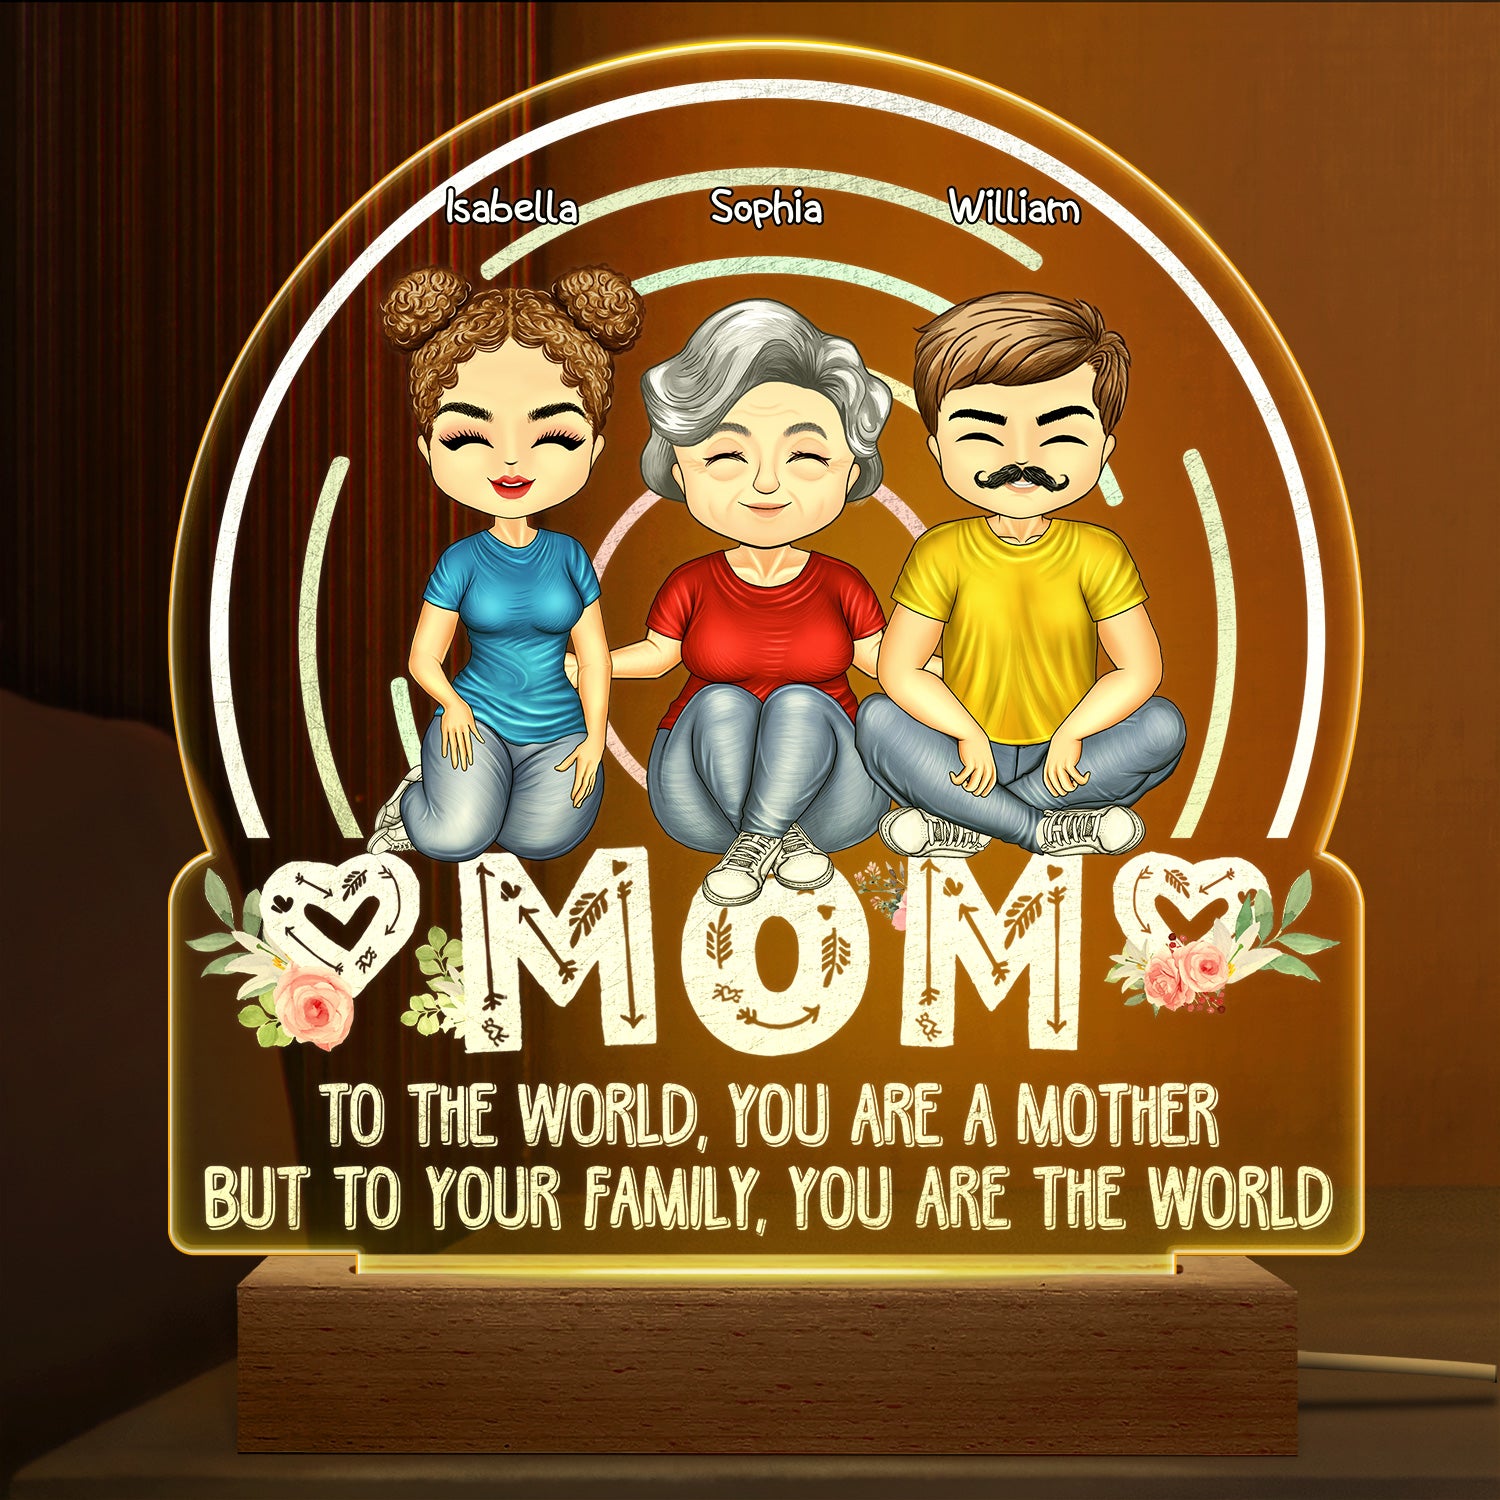 To The World You Are A Mother Grandma - Birthday, Loving Gift For Mom, Mother, Grandma, Grandmother - Personalized Custom 3D Led Light Wooden Base